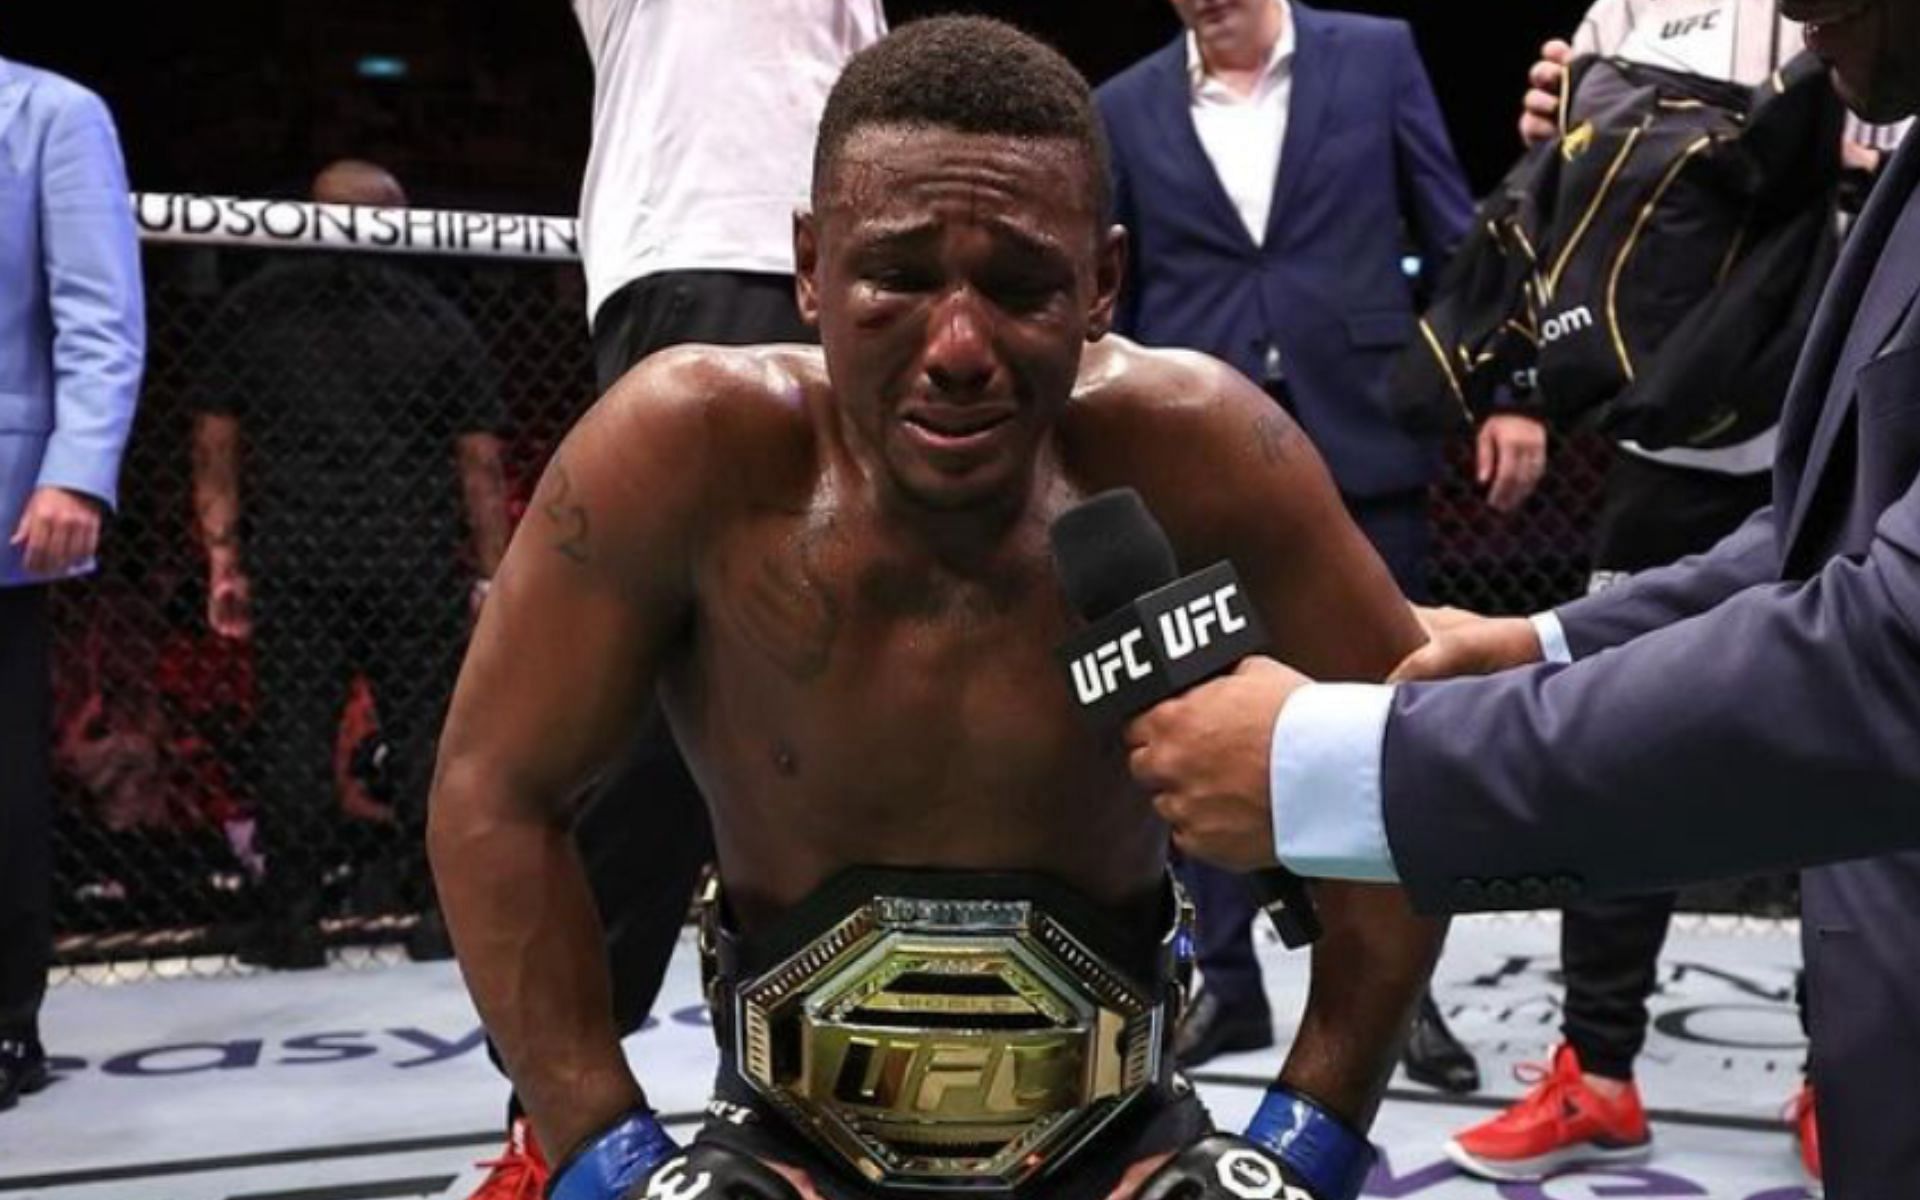 Jamahal Hill (pictured) after winning the UFC belt at UFC 283 [Photo Courtesy @sweet_dreams_jhill on Instagram]